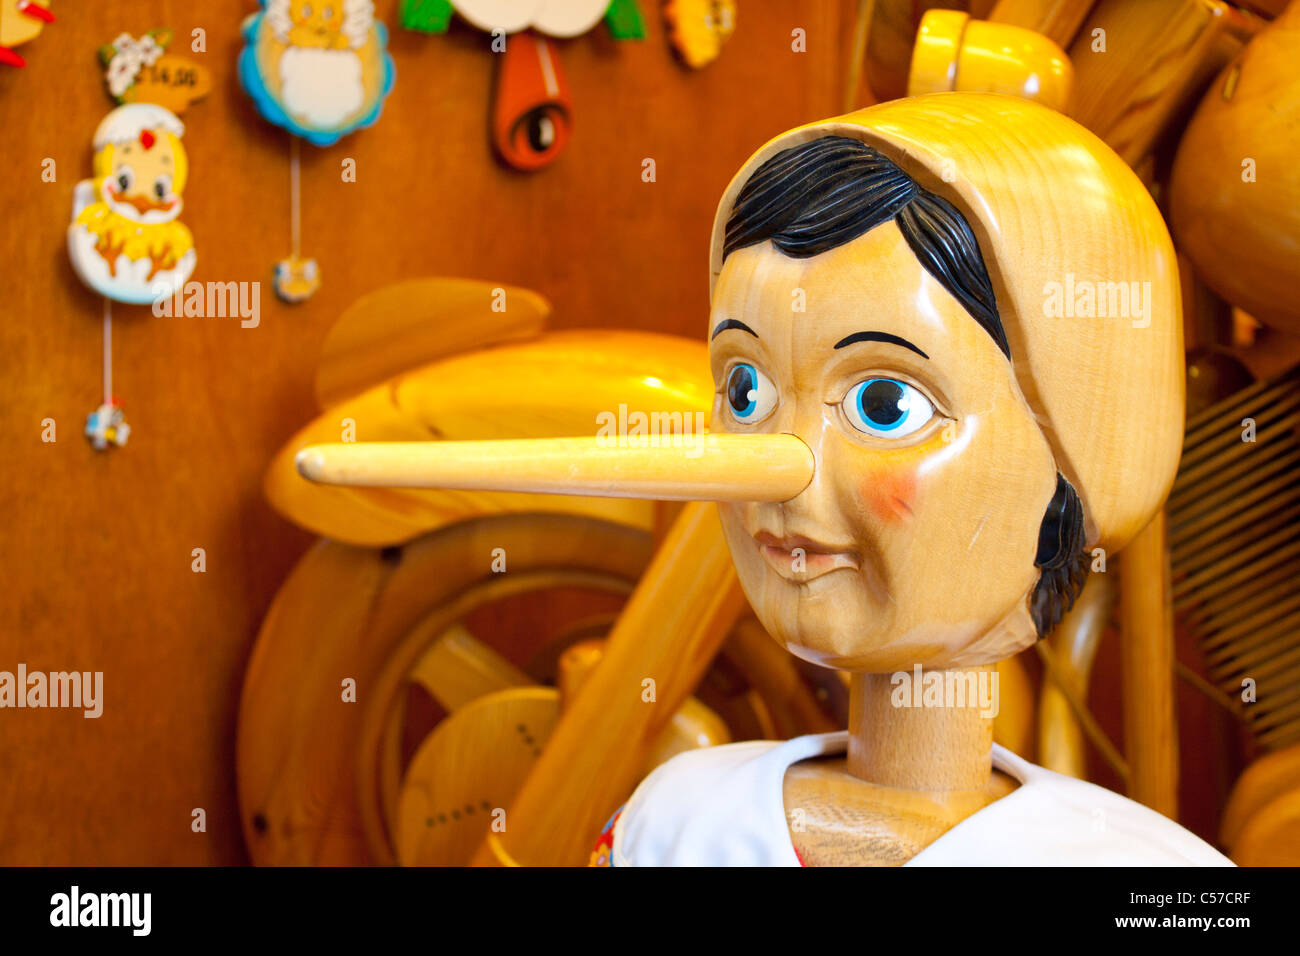 Wooden Pinocchio doll with long nose Stock Photo